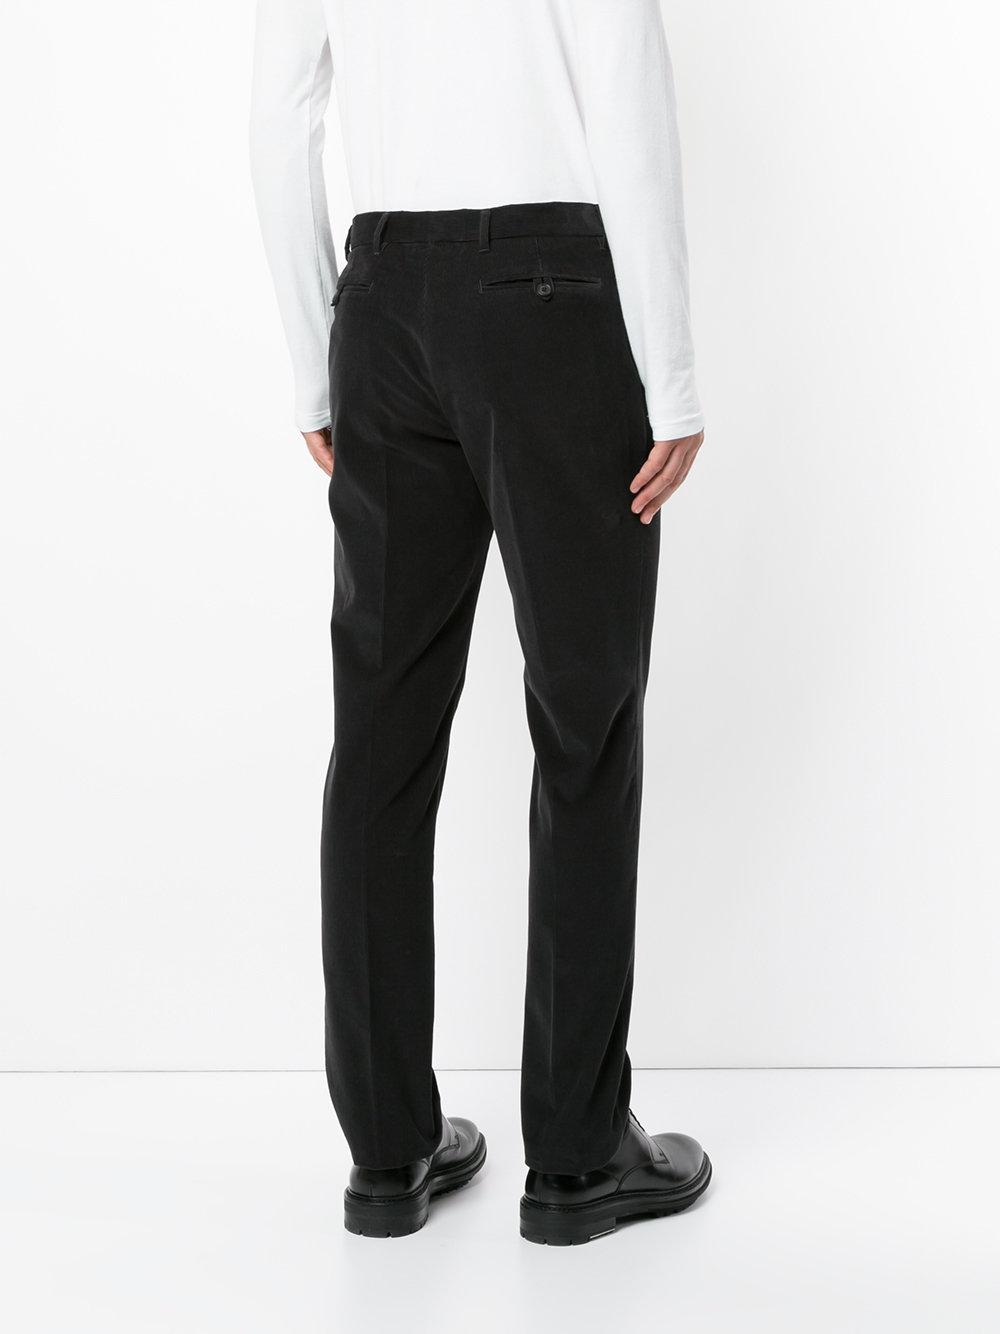 Gieves & Hawkes Cotton Tailored Fitted Trousers in Black for Men - Lyst